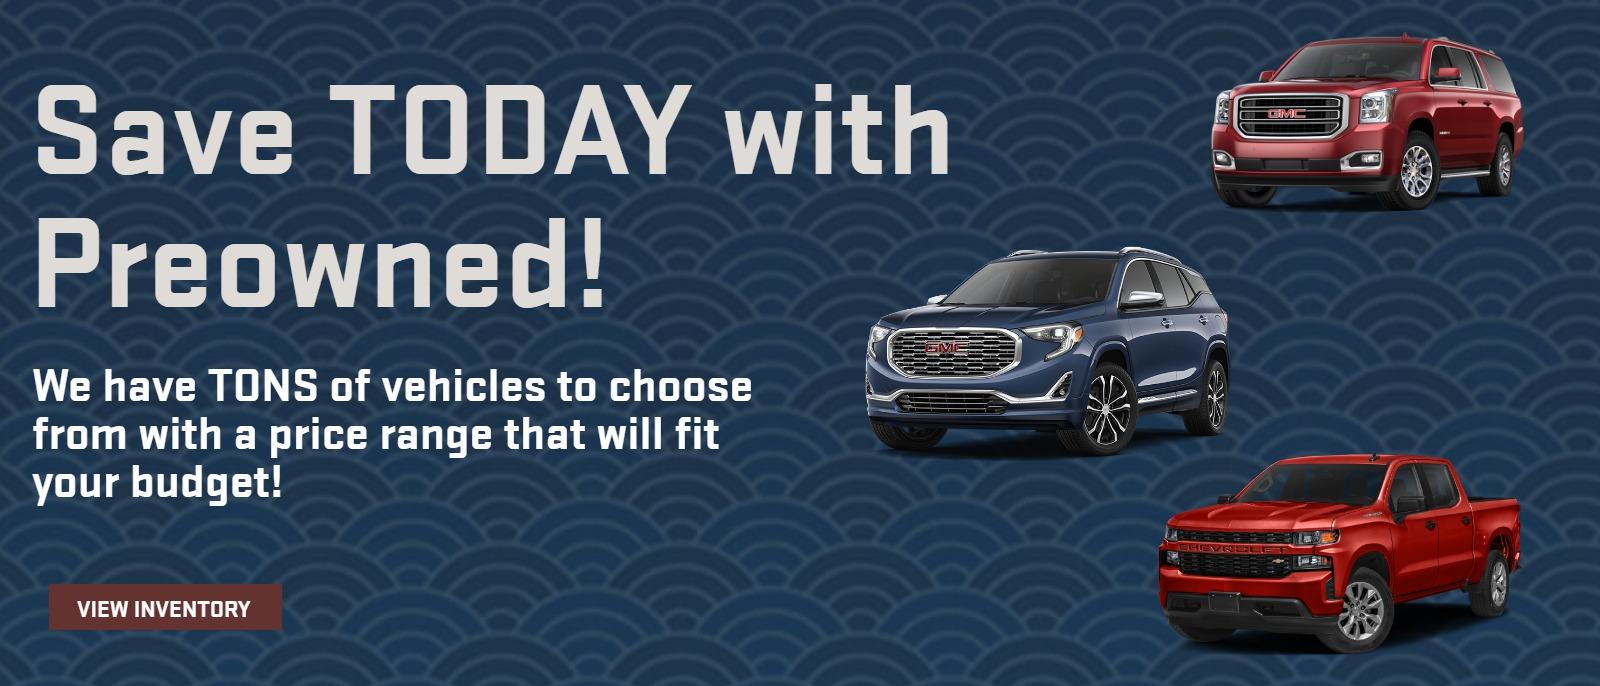 Save TODAY with Preowned!
We have TONS of vehicles to choose from with a price range that will fit your budget!